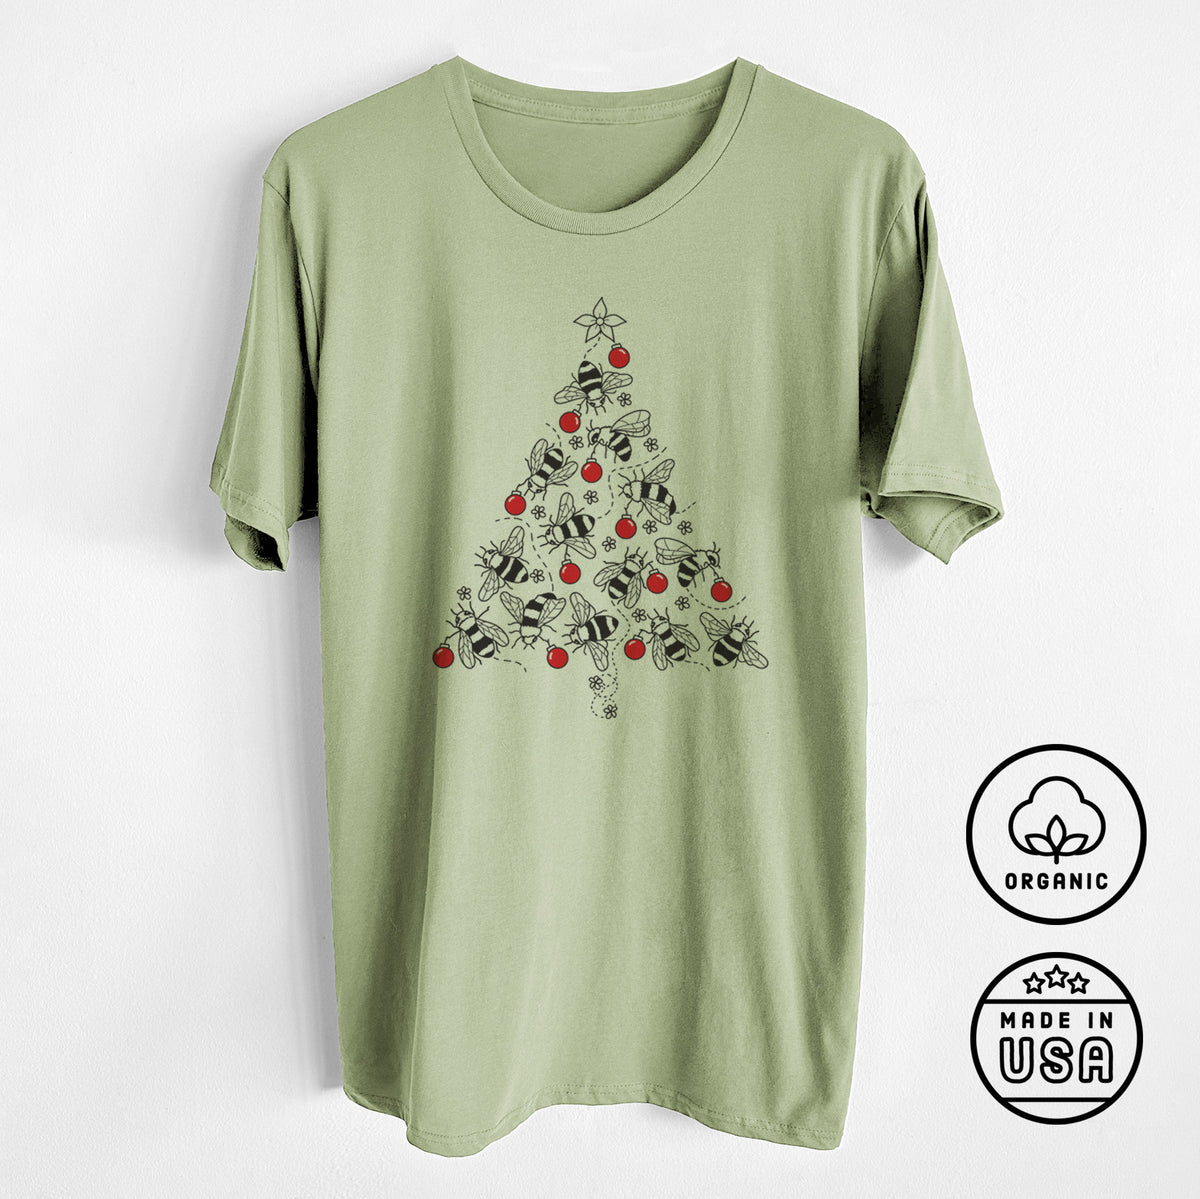 Christmas Tree of Bees - Unisex Crewneck - Made in USA - 100% Organic Cotton